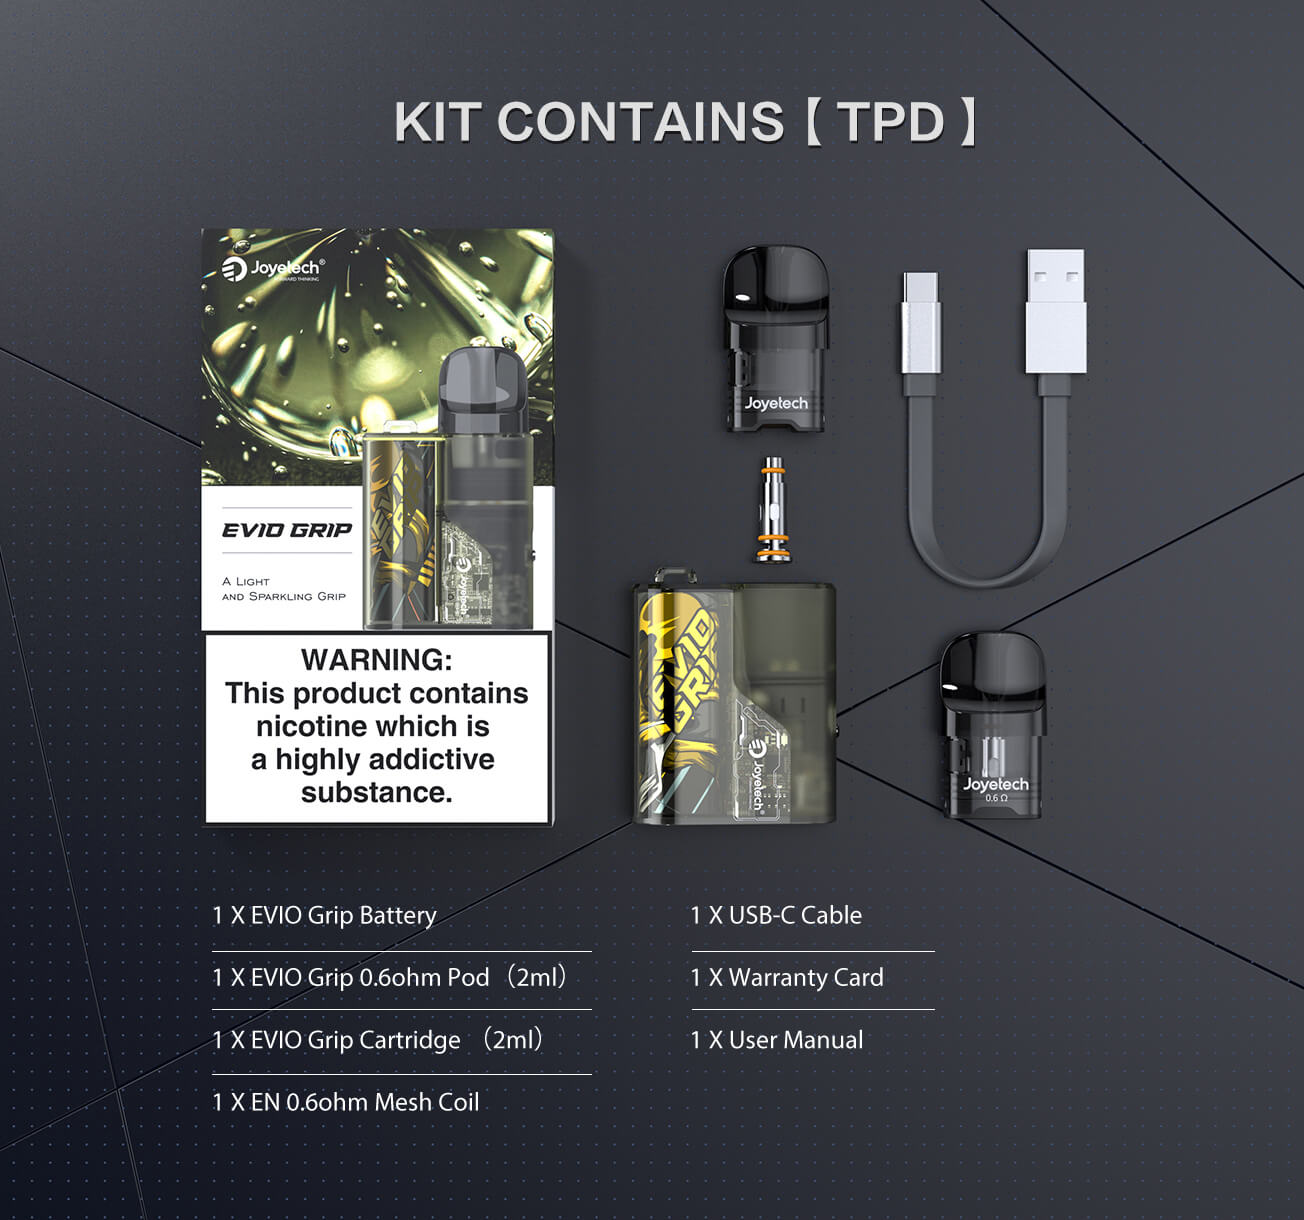 KIT CONTAINS (TPD)